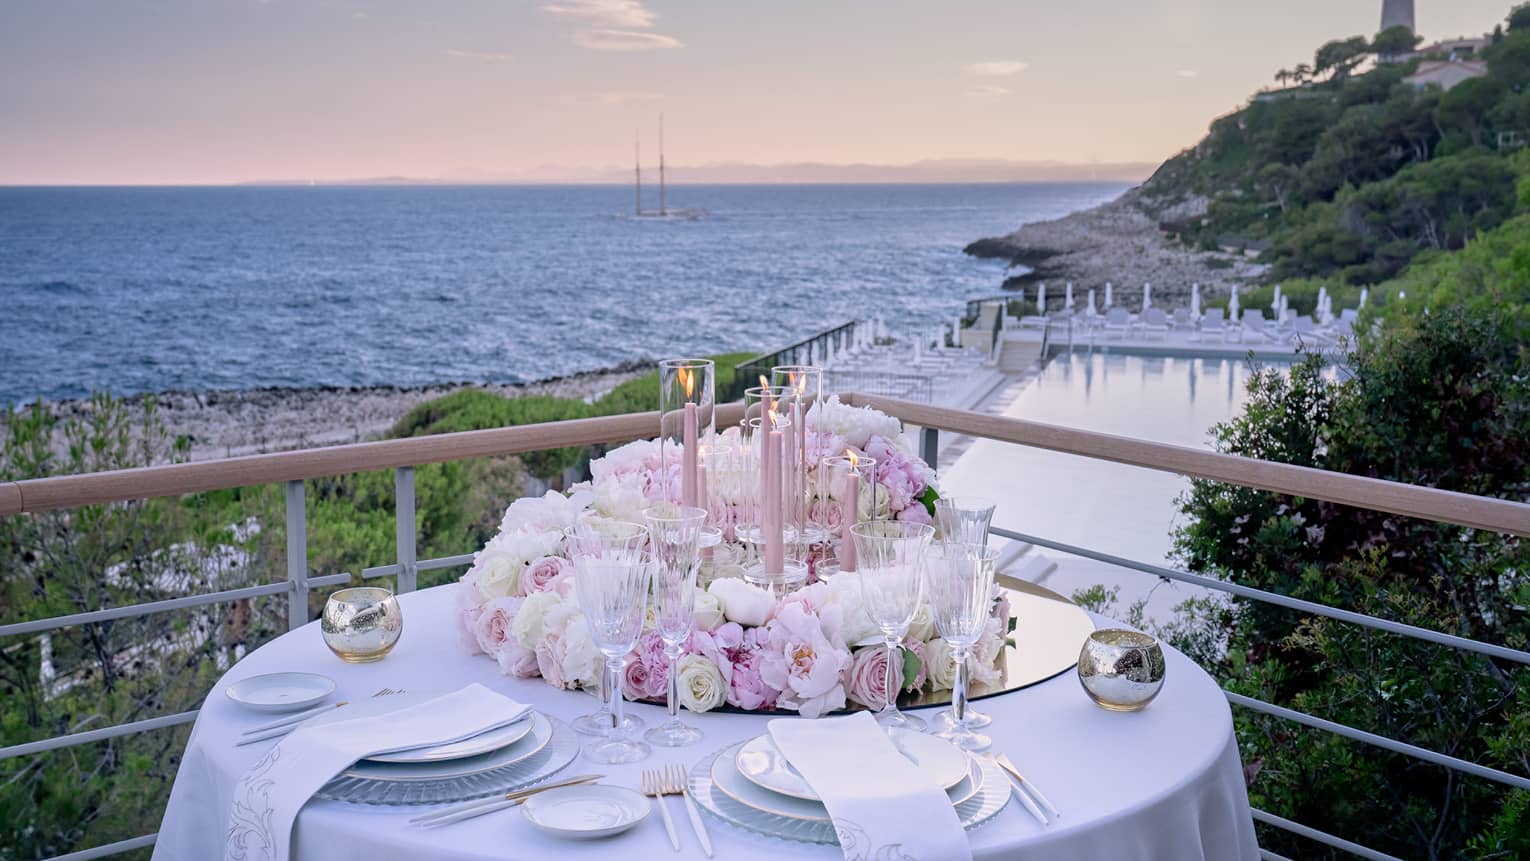 Balcony with round set table, pink floral arrangement, water views at sunset